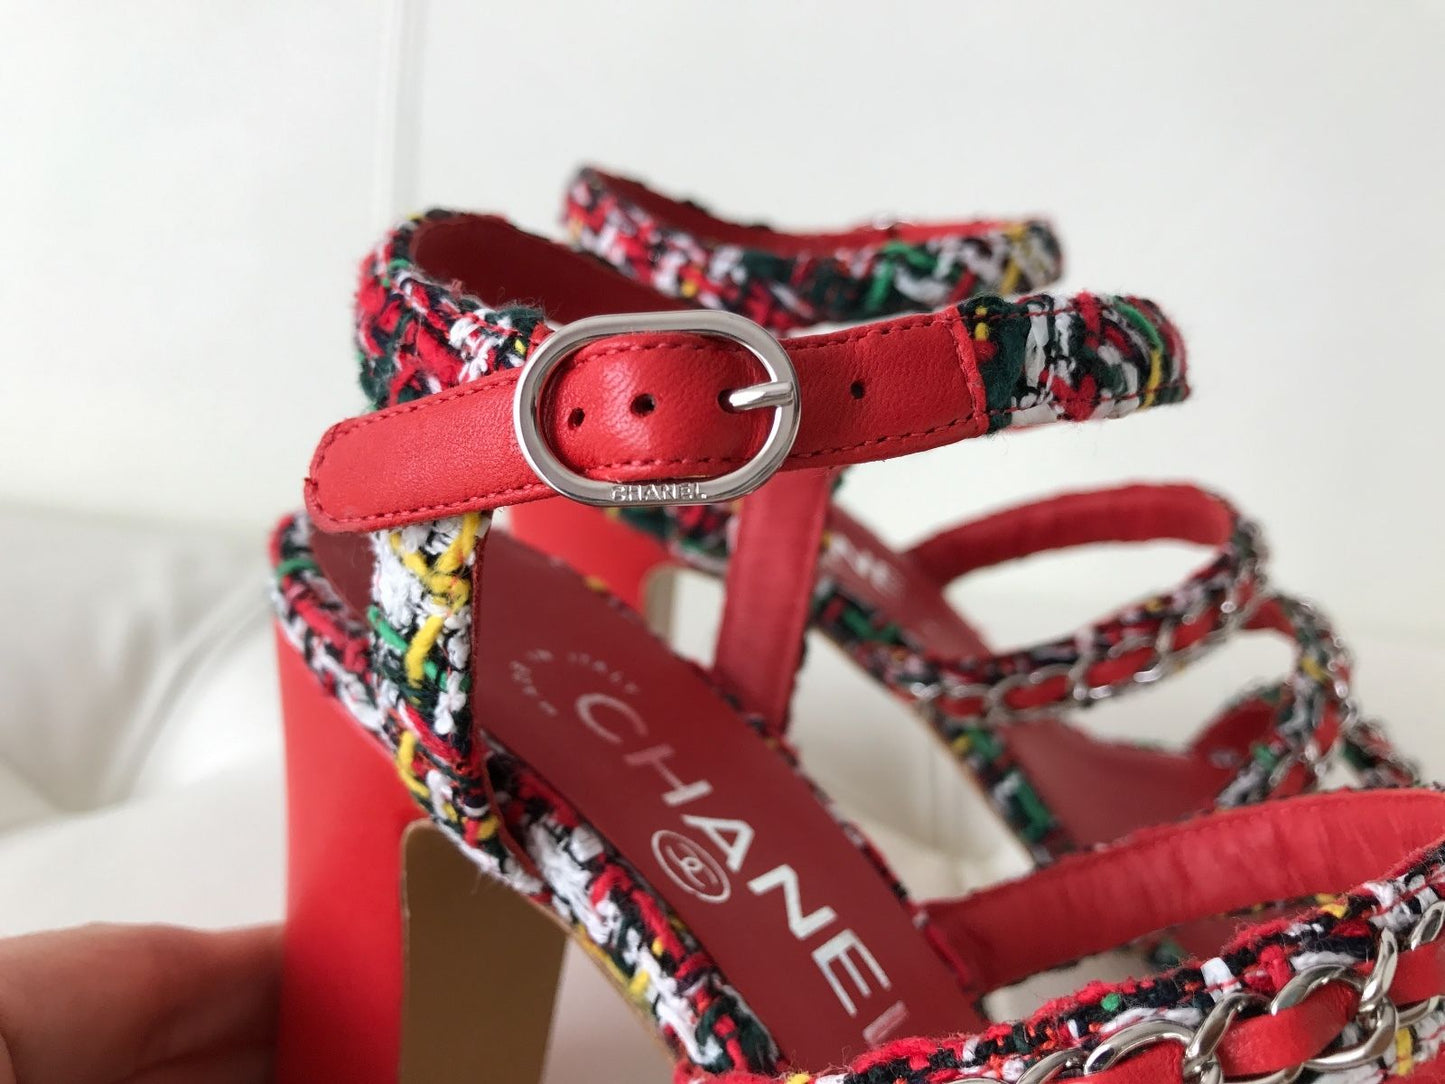 $1.1K CHANEL RED LEATHER MULTICOLOR TWEED CHAINED CHAIN SANDAL SANDALS OPEN TOE SHOES